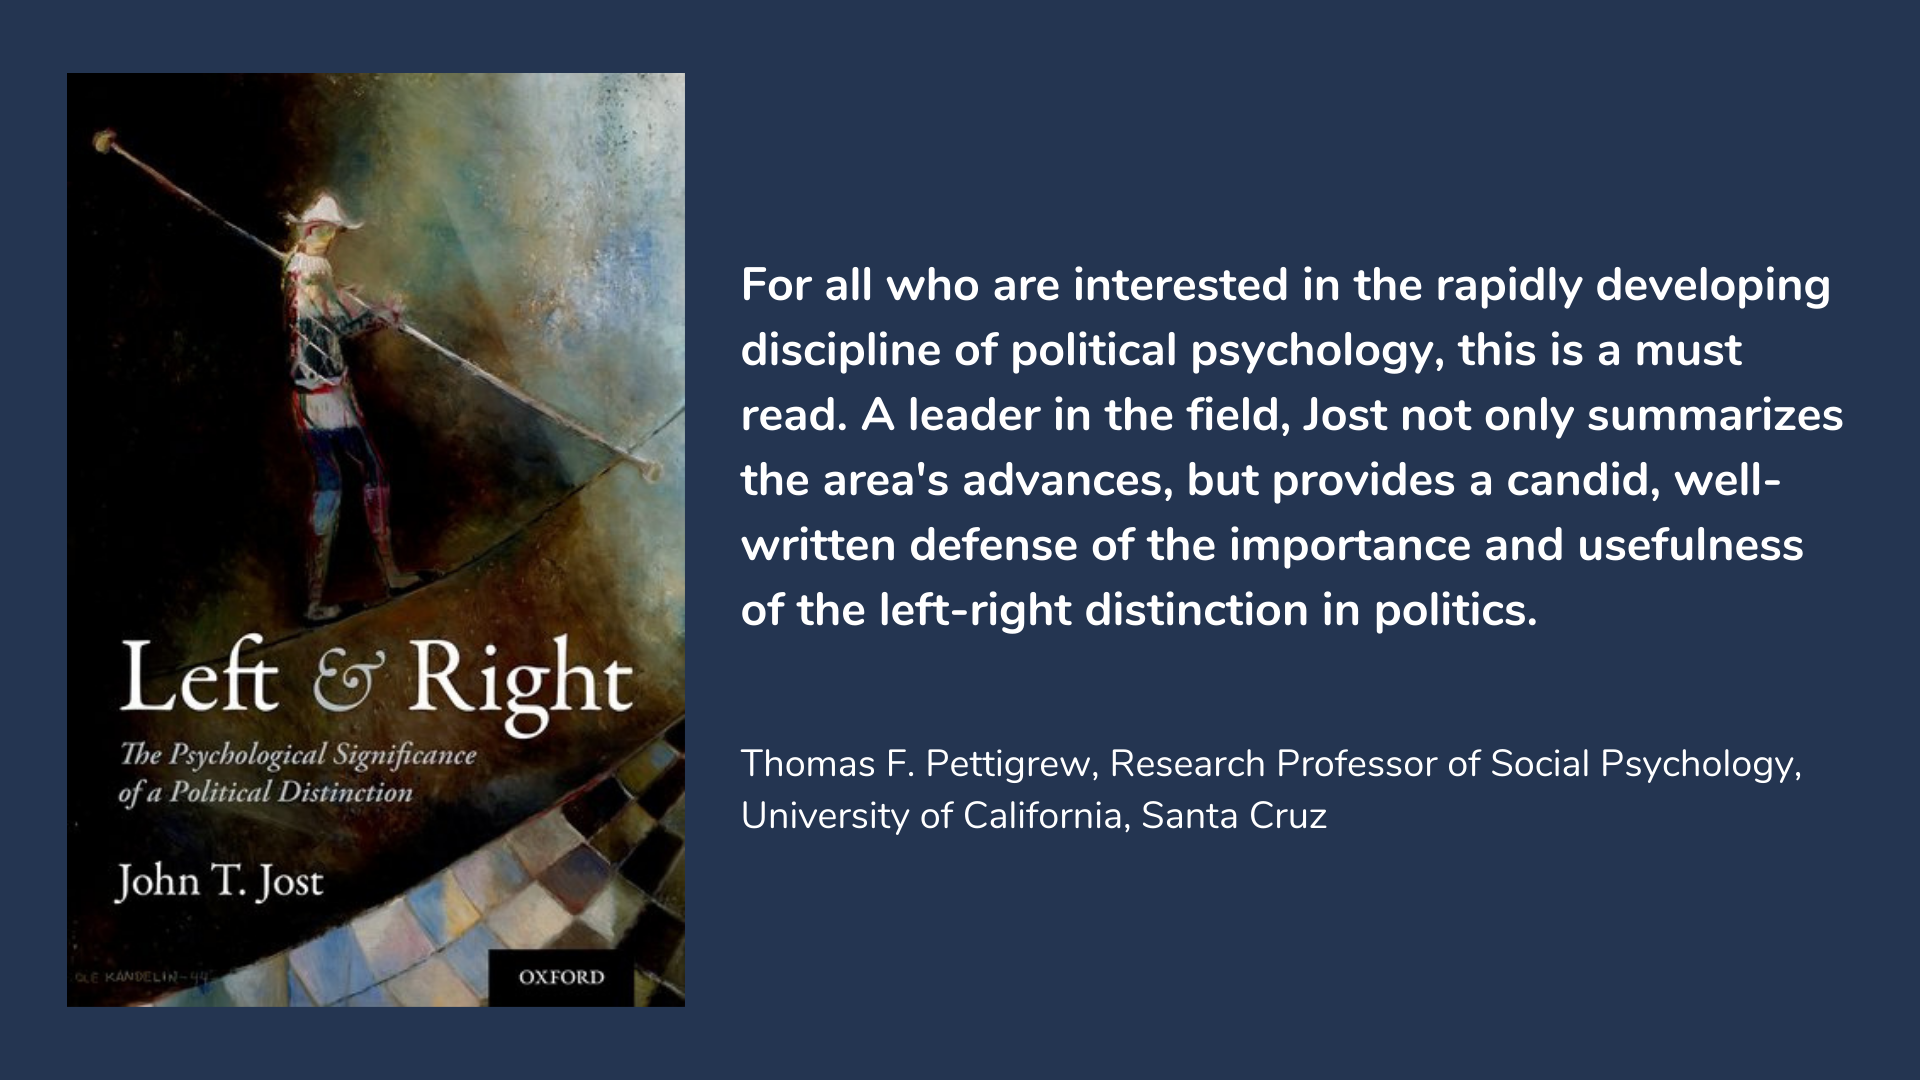 Left and Right The Psychological Significance of a Political Distinction, book cover and description.